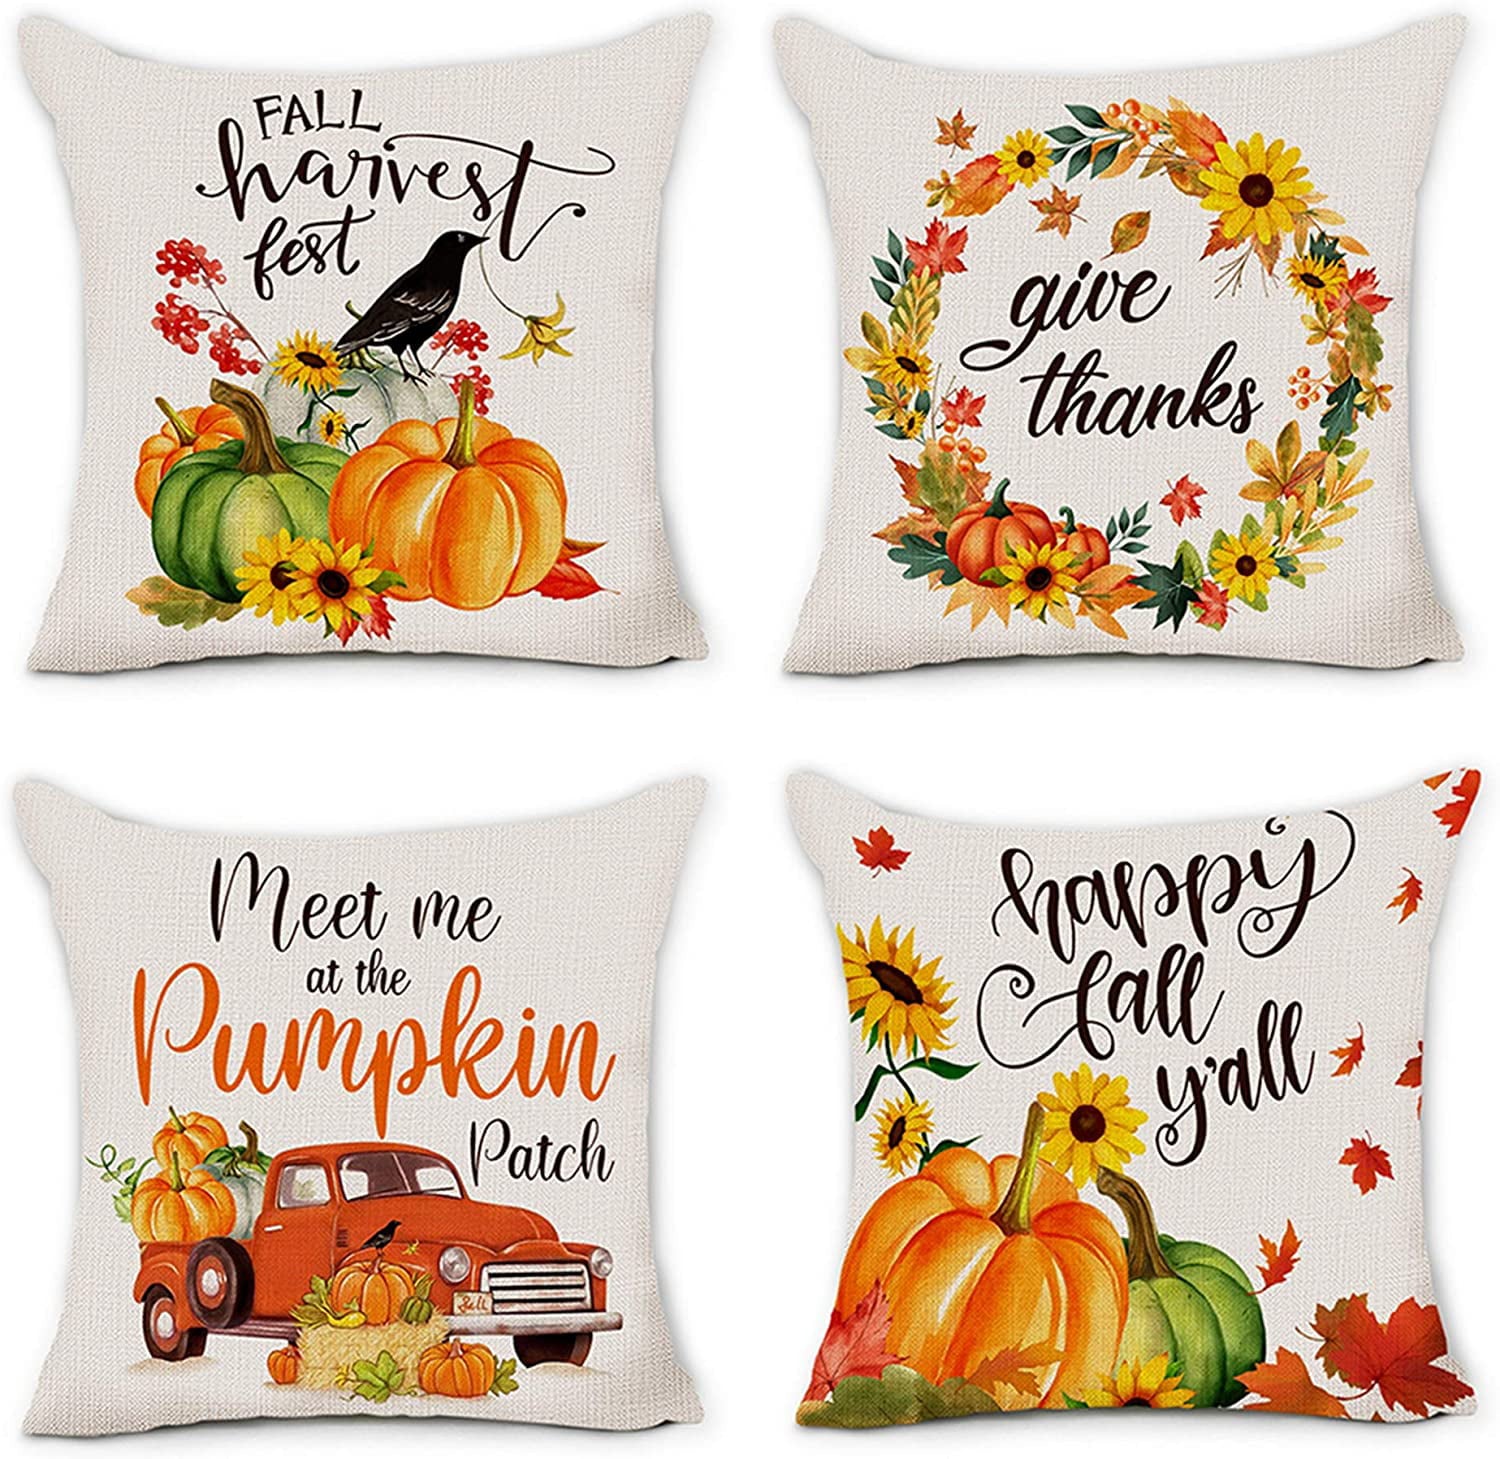 Rustic Home Accessories: Four Farmhouse-Styled Pillow Covers for Fall, Featuring Pumpkins & Sunflowers